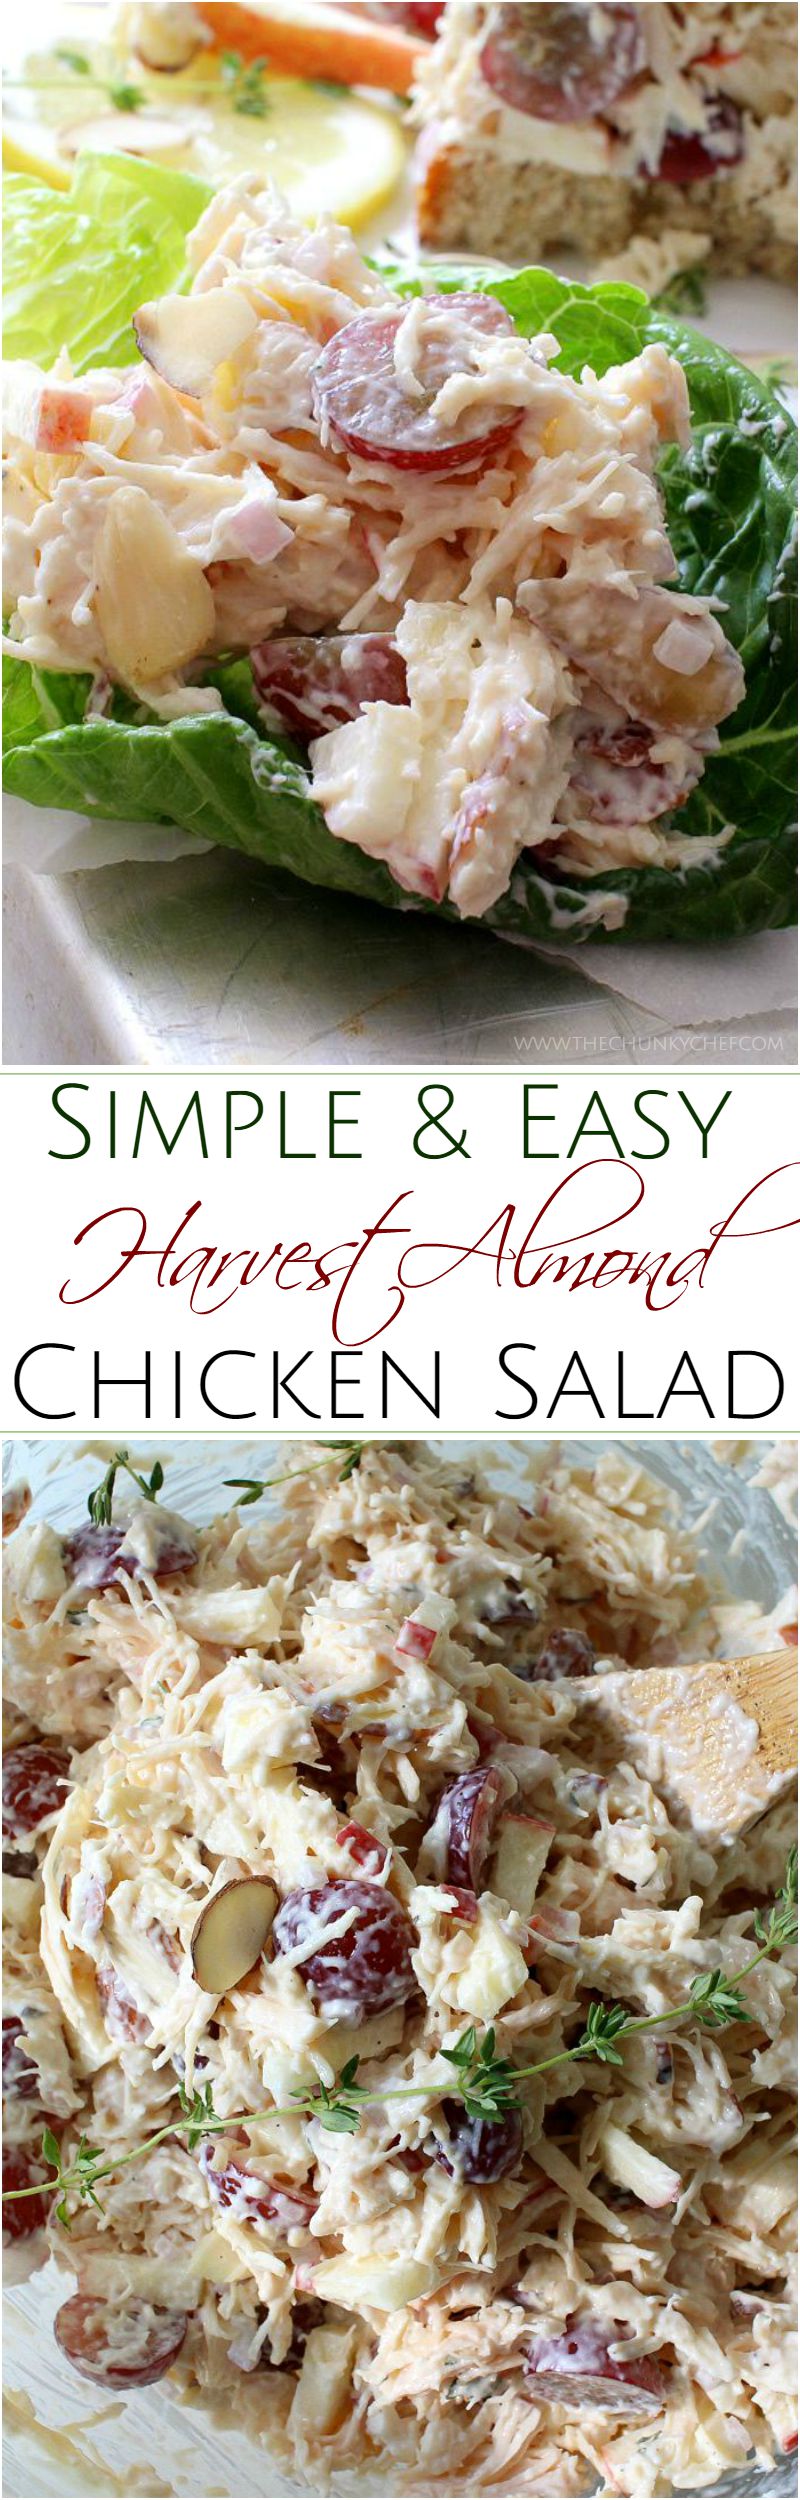 Make busy weeknight meals a snap with this easy harvest almond chicken salad! Crisp apples, sweet grapes and crunchy almonds add great texture and flavor!